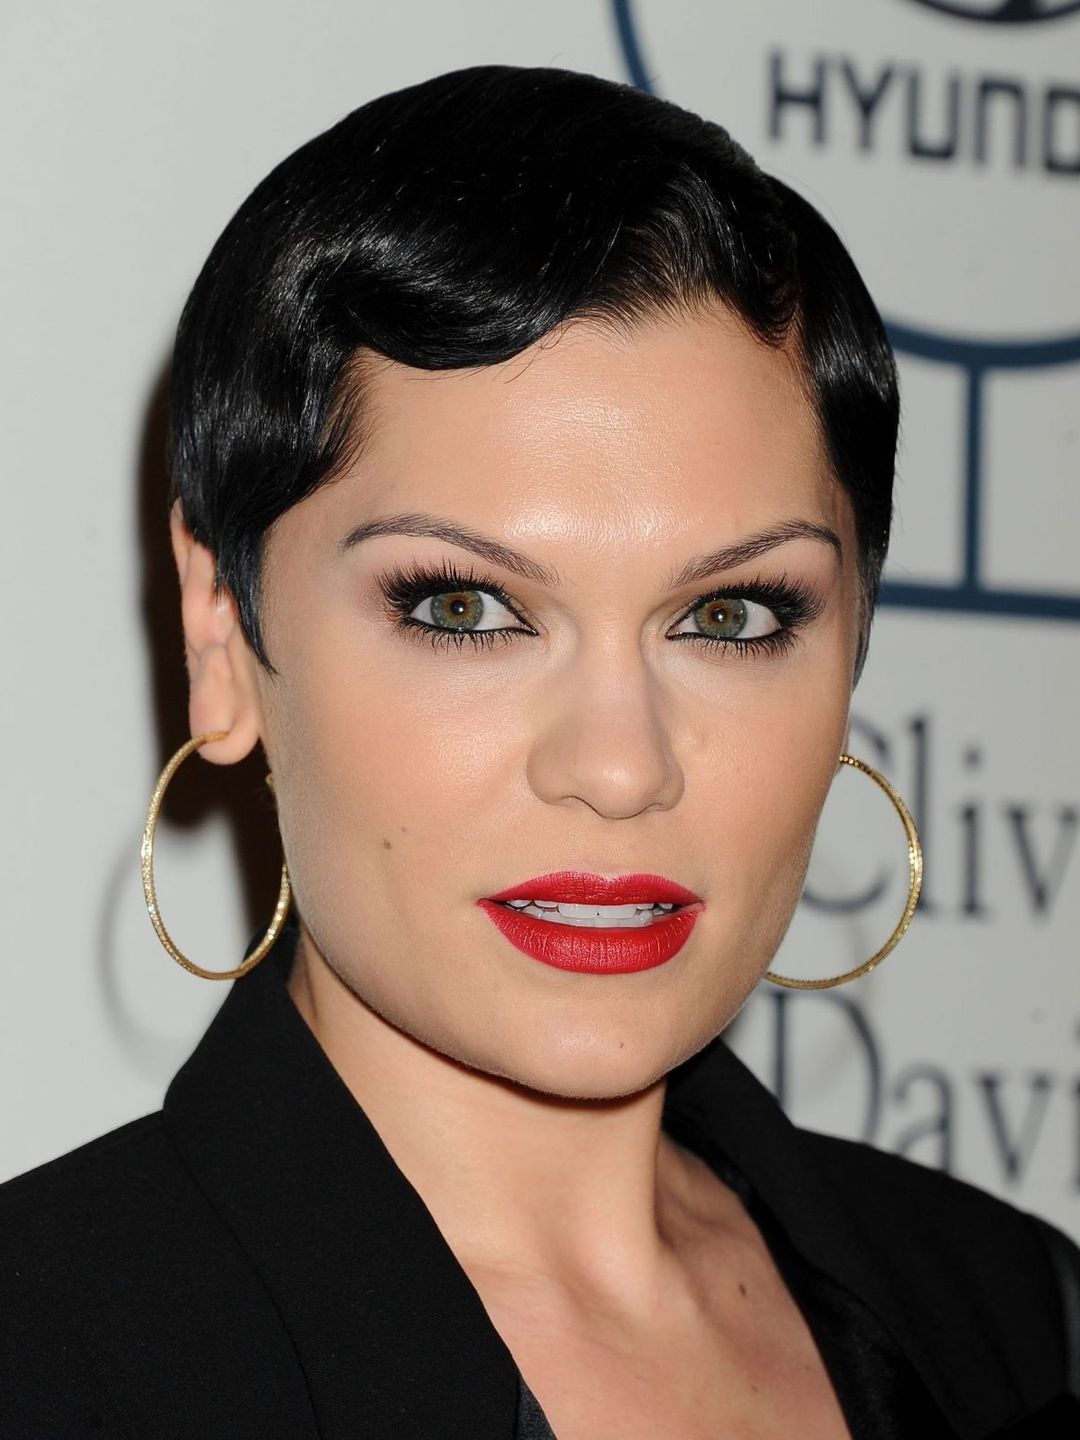 Jessie J who is her mother